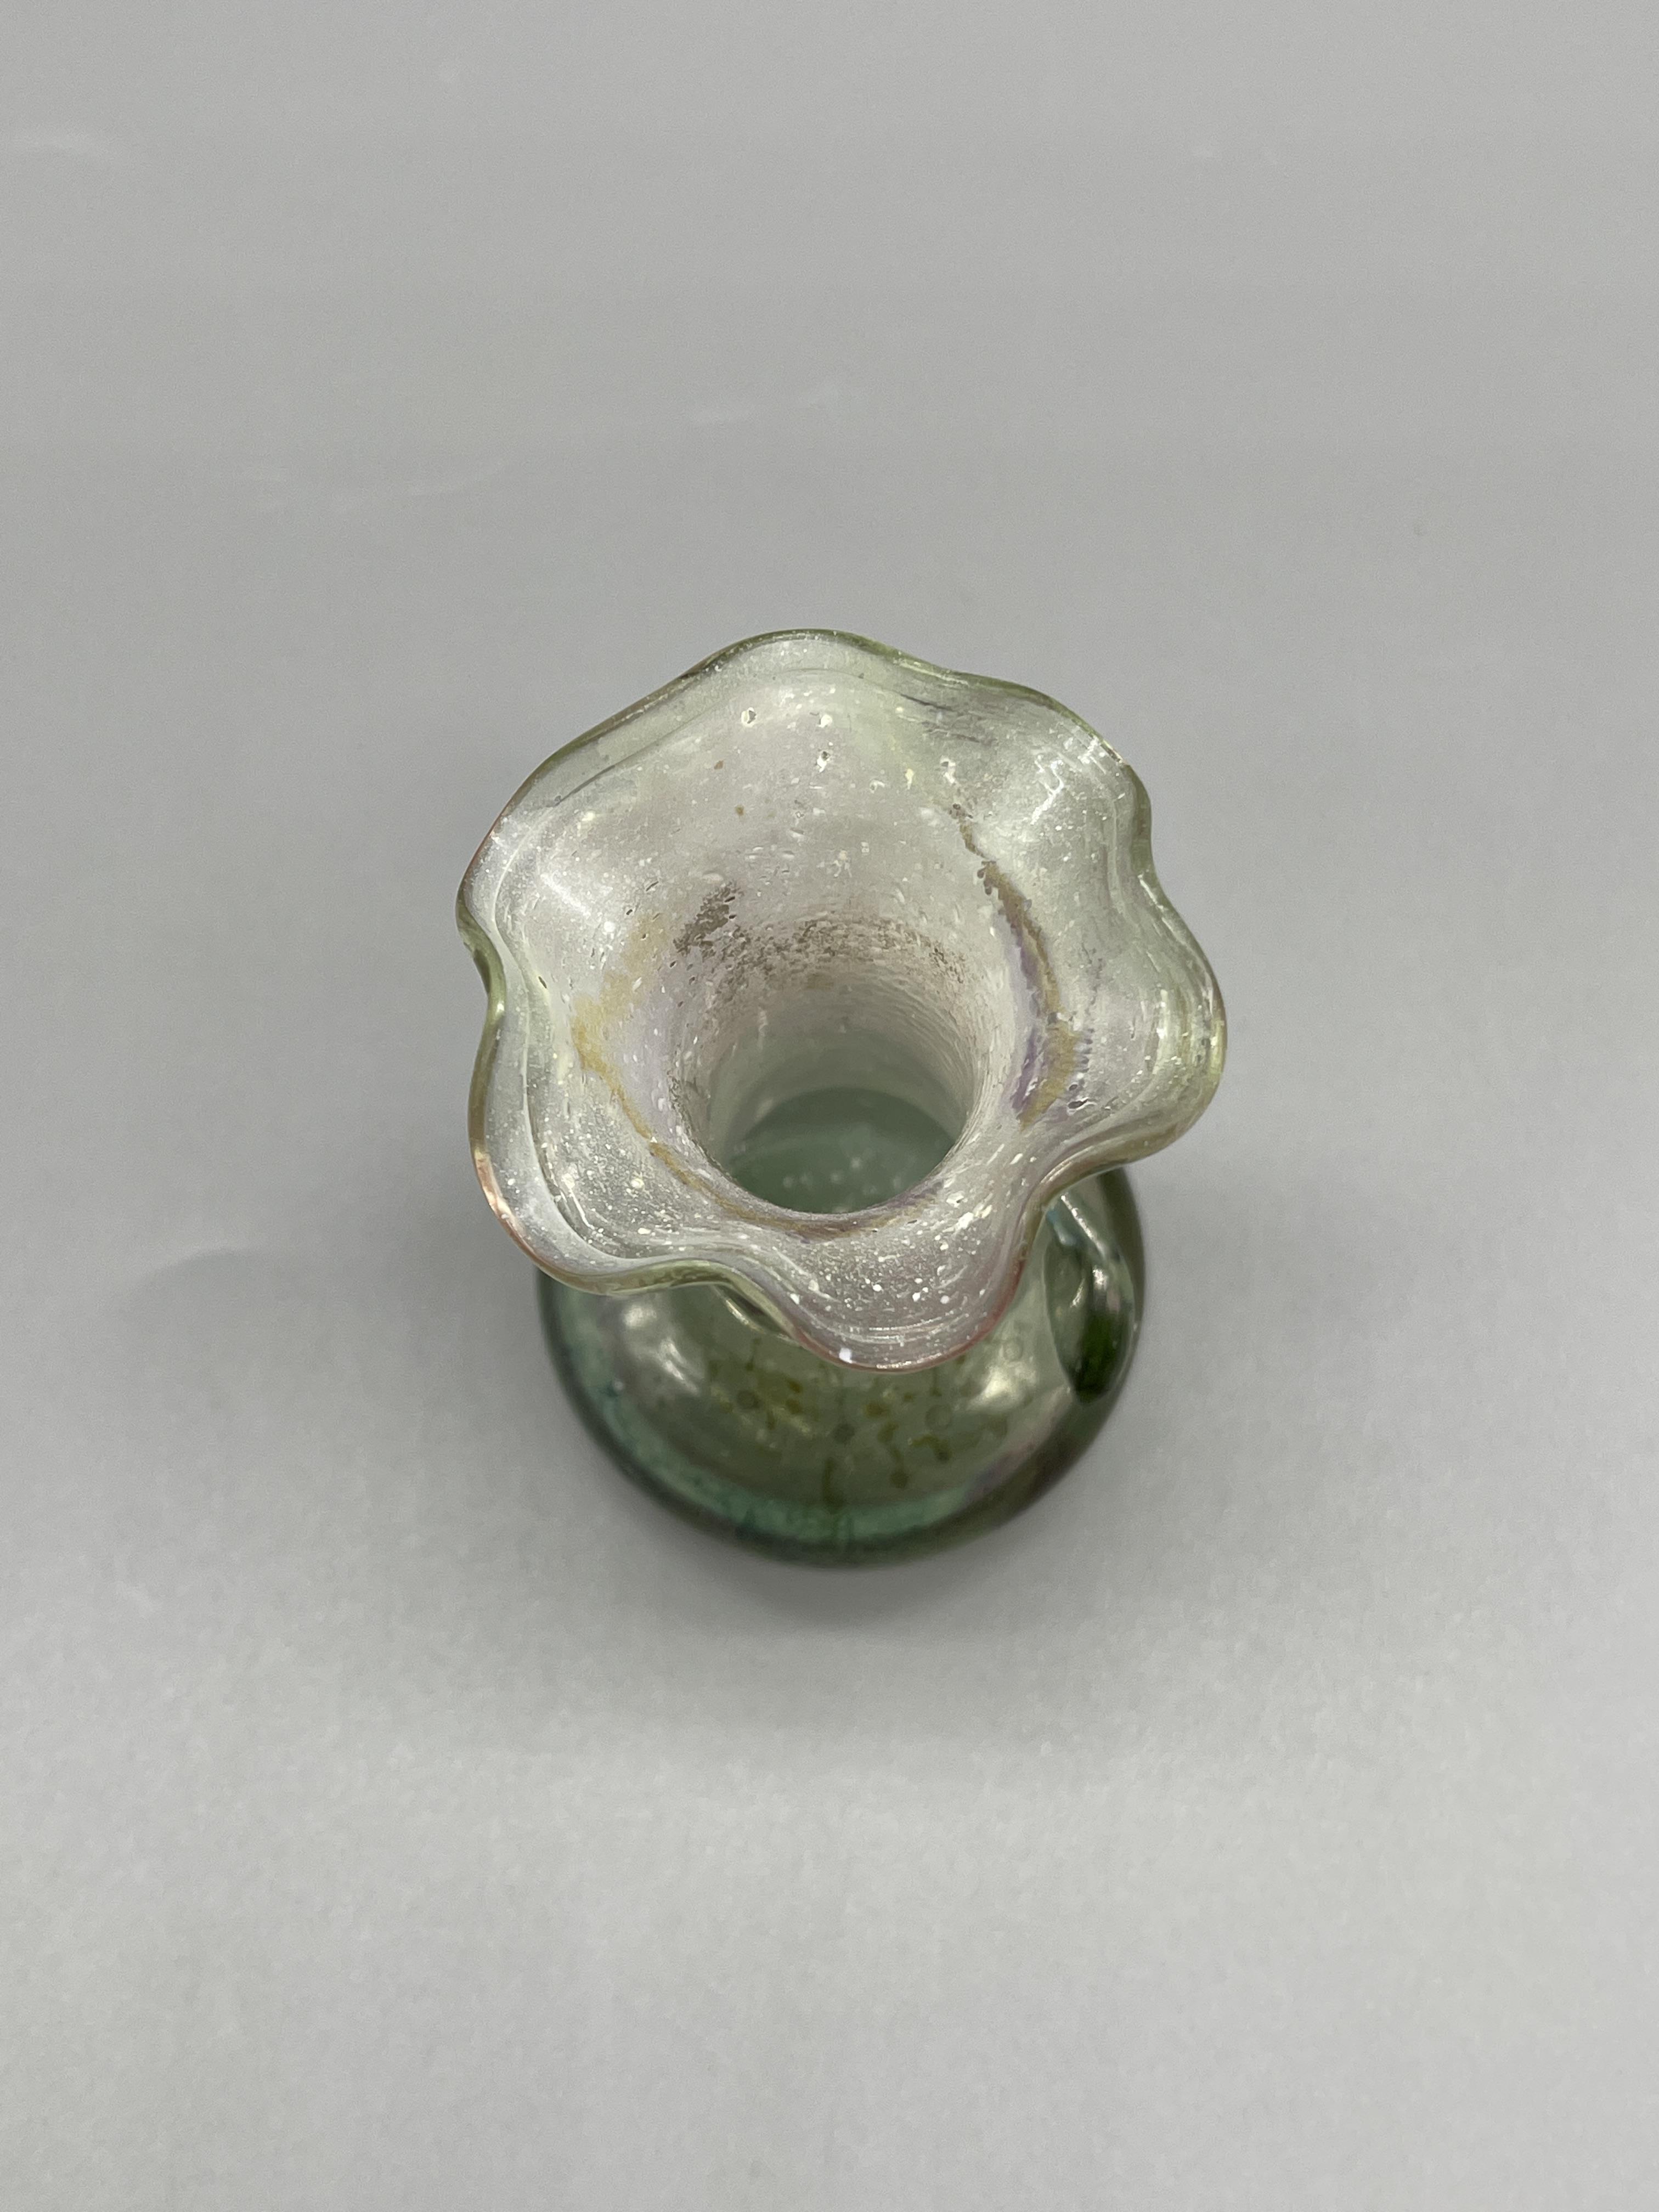 Small Roman Glass Style Vase. Approximately 2inche - Image 3 of 5